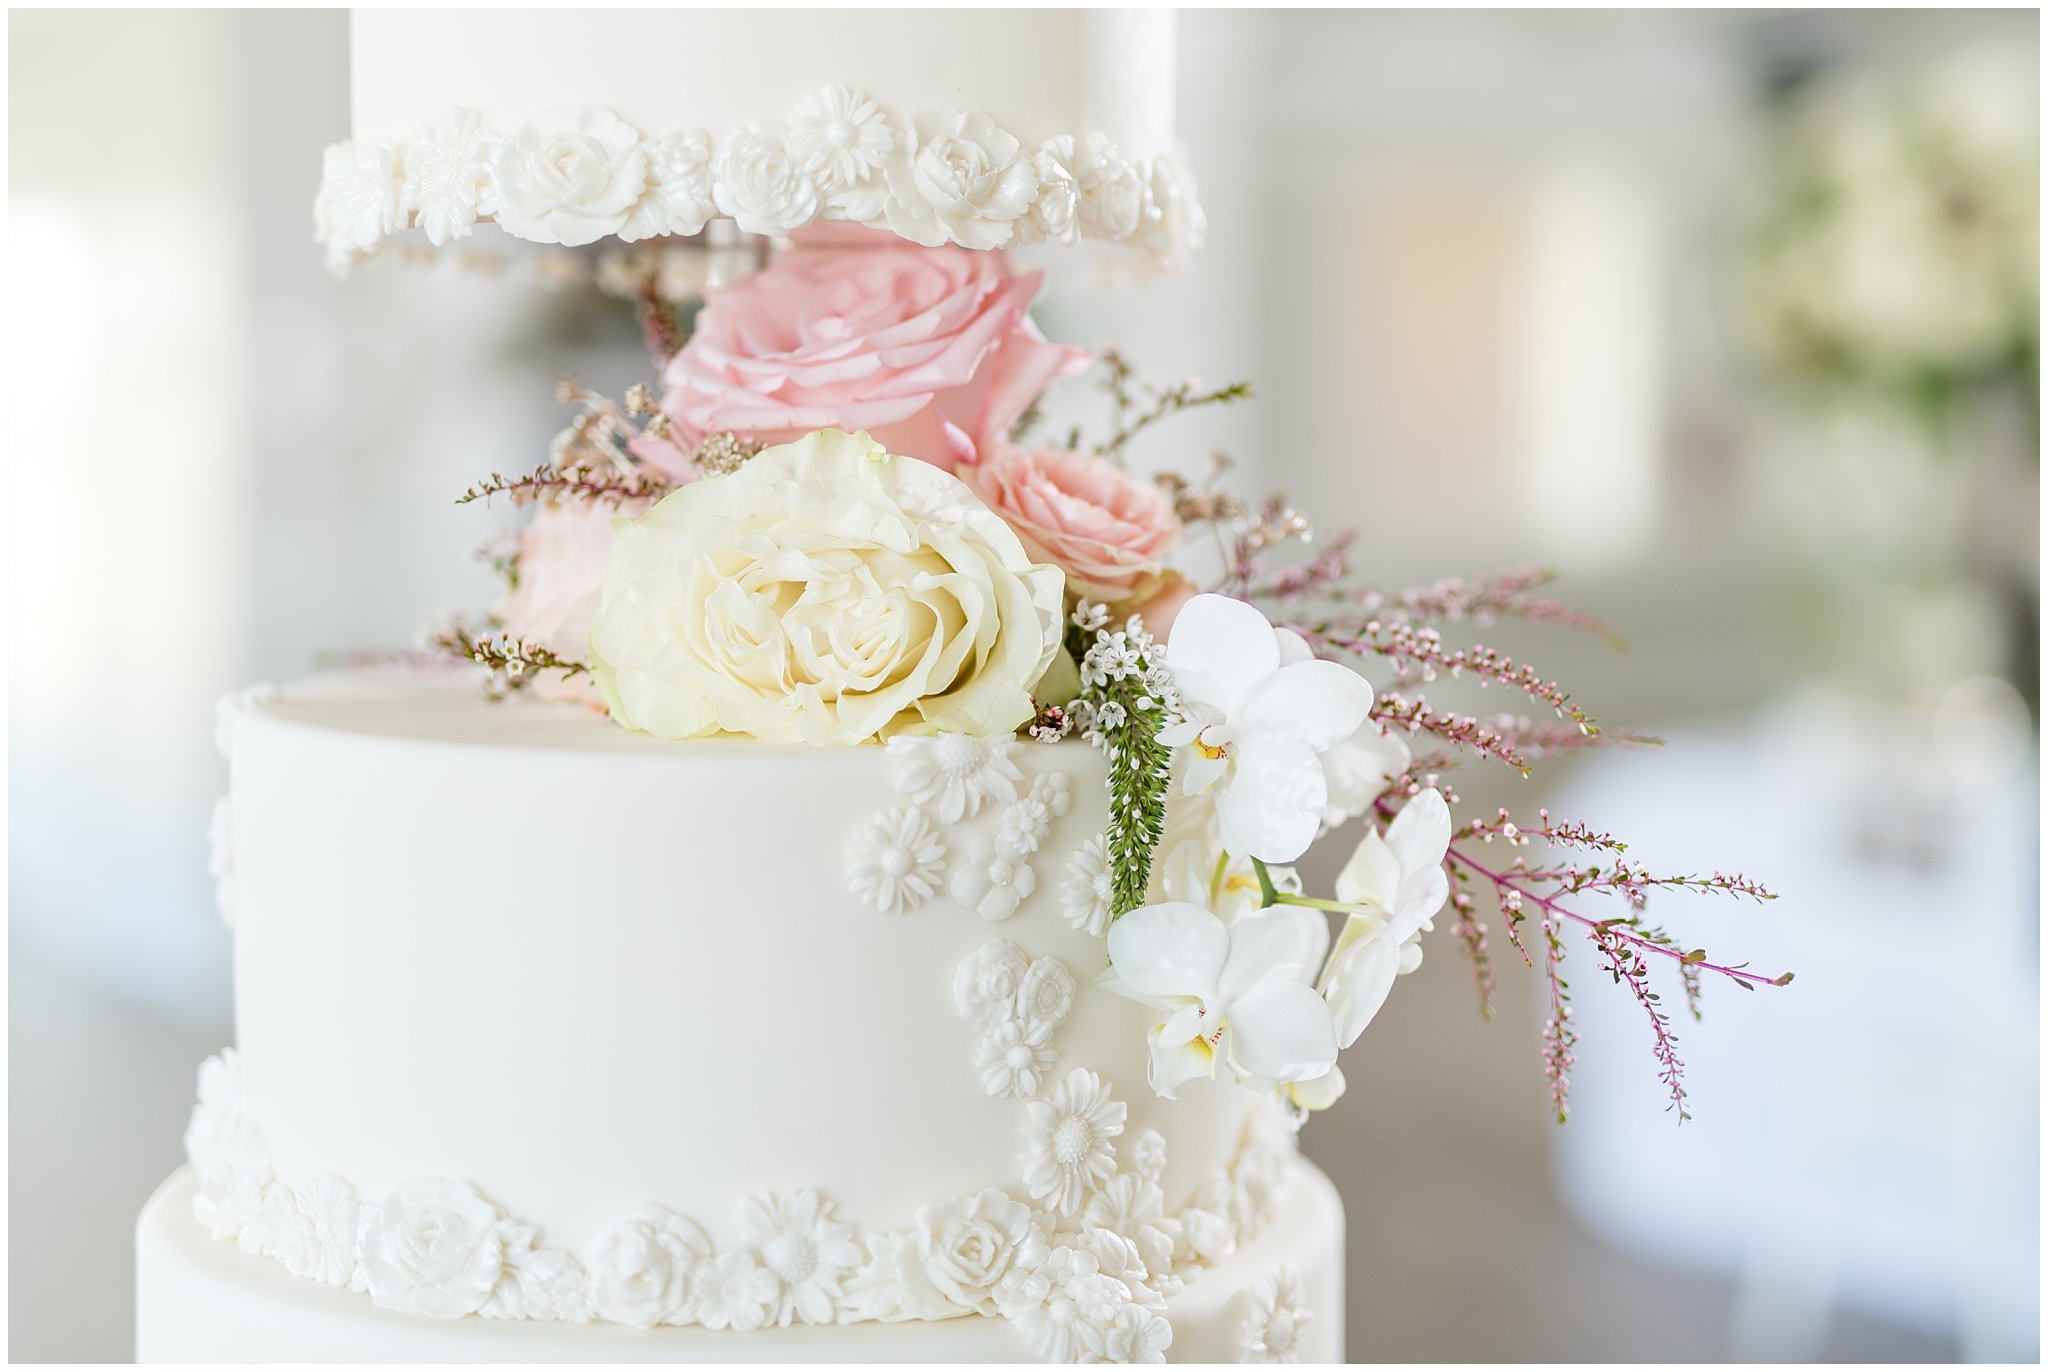 Eight tier white elegant wedding cake | gold, navy and white wedding | Roses accenting the cake | Talia Event Center